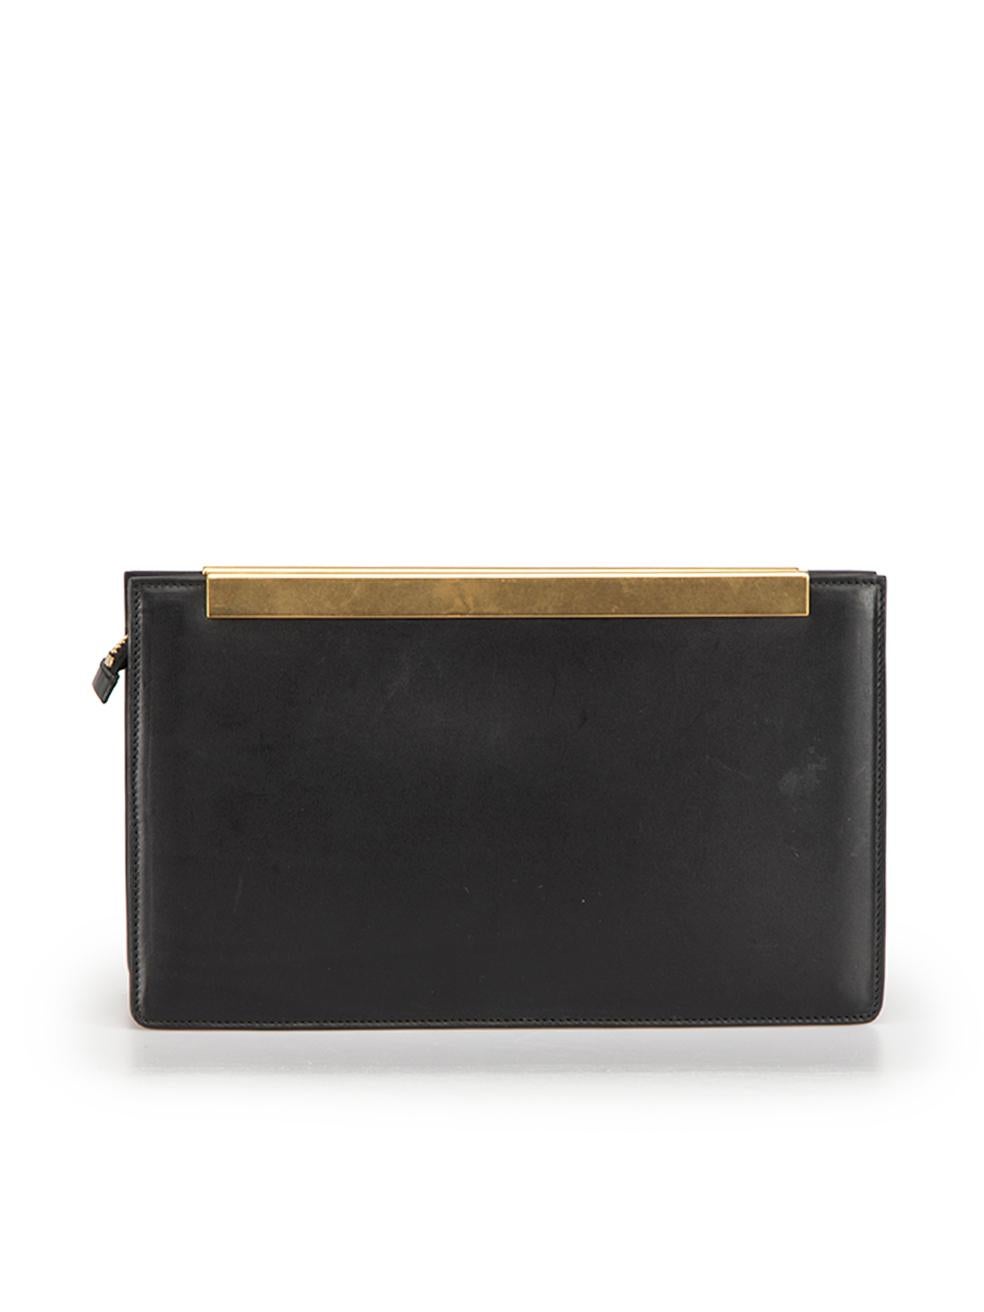 Saint Laurent Black Leather Lutetia Clutch In Excellent Condition For Sale In London, GB